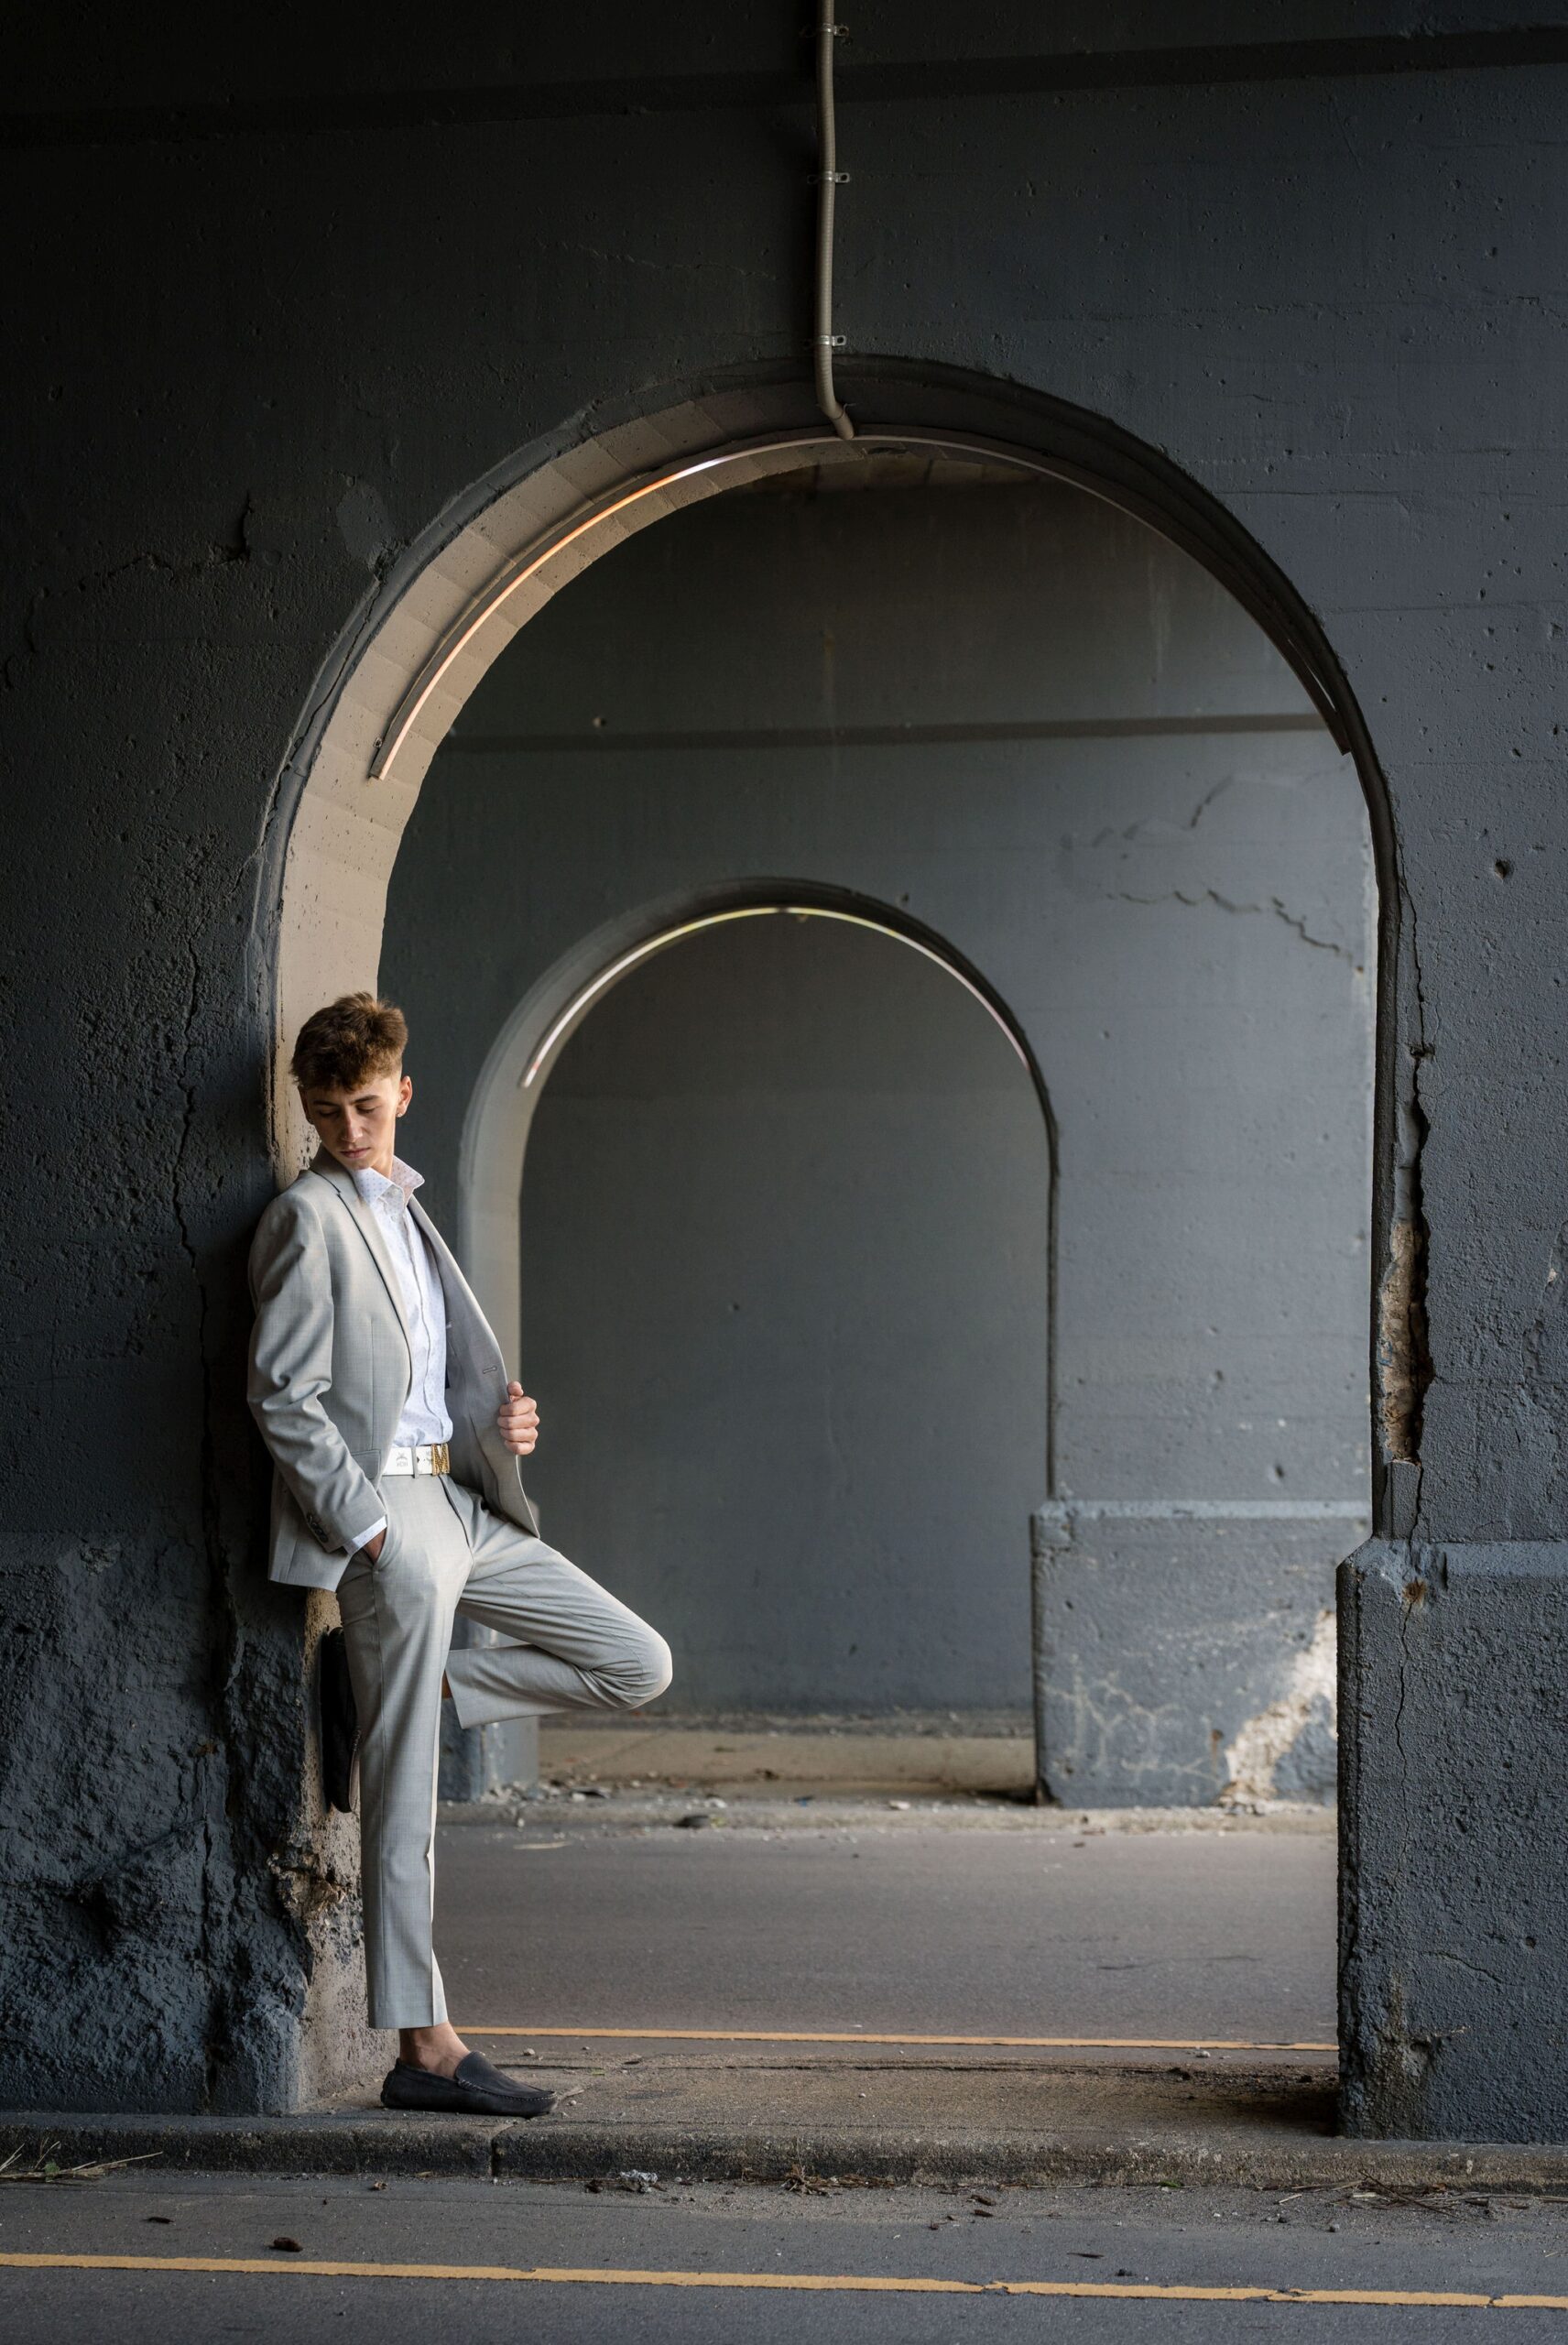 Male, wearing a gray suit, poses for a senior photo in Detroit against an archway.